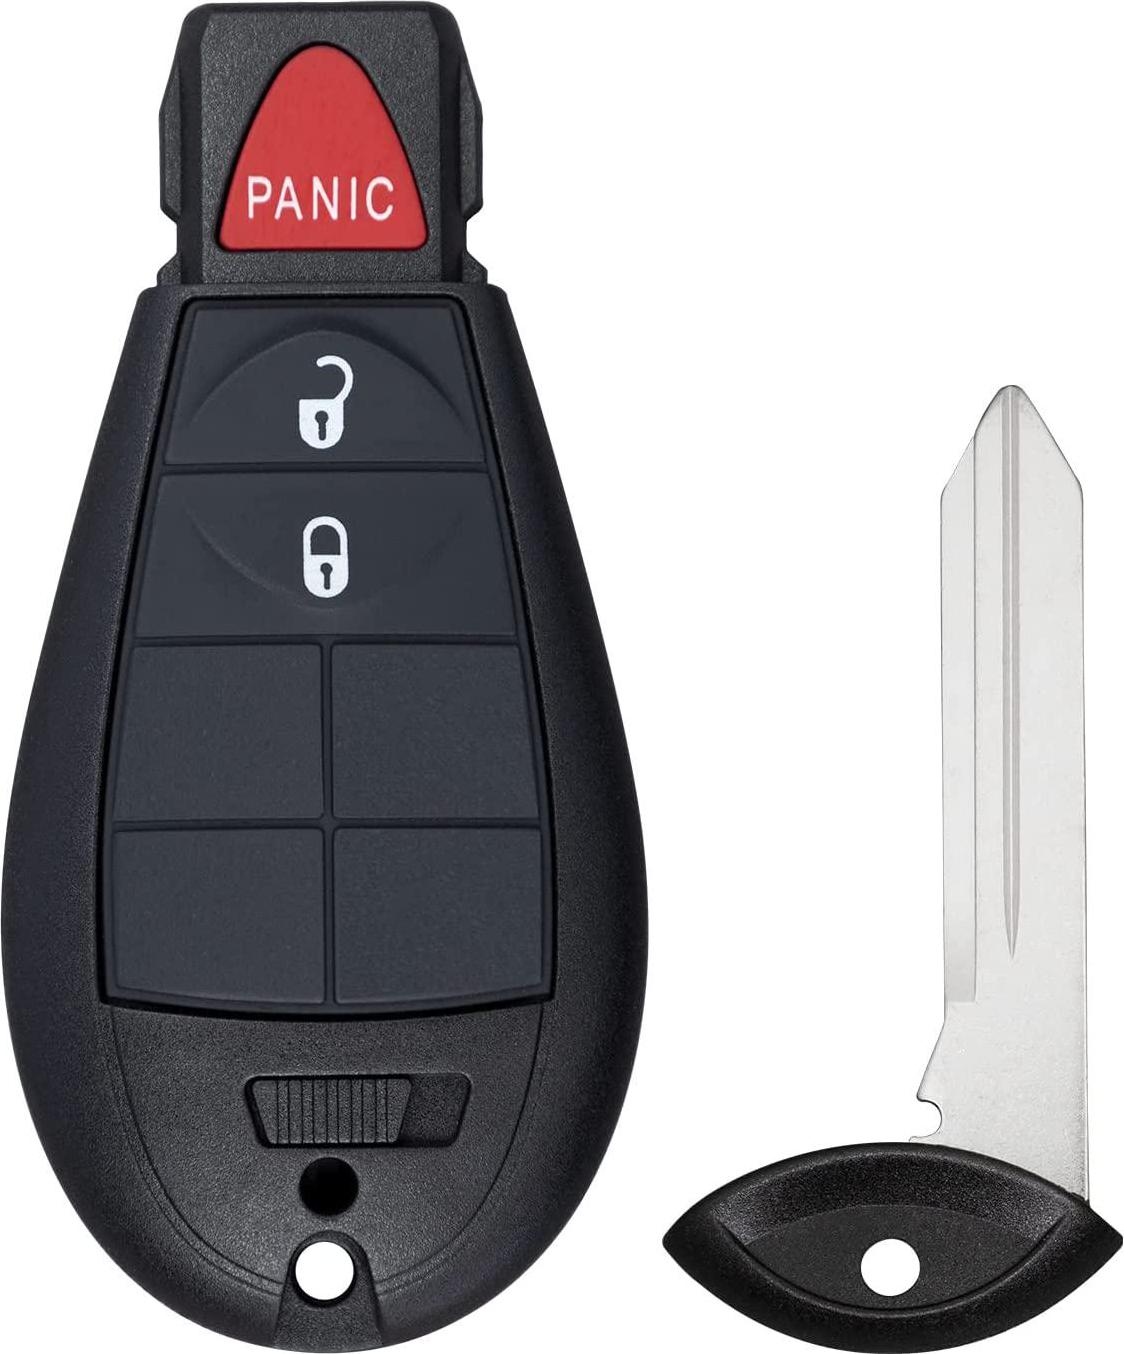 StandardAutoPart, StandardAutoPart Fobik Key, Car Keyless Entry Remote fob for Grand Caravan Journey Durango Charger Ram Town and Country Grand Cherokee M3N5WY783X IYZ-C01C [1 Year Warranty] (3 Button)